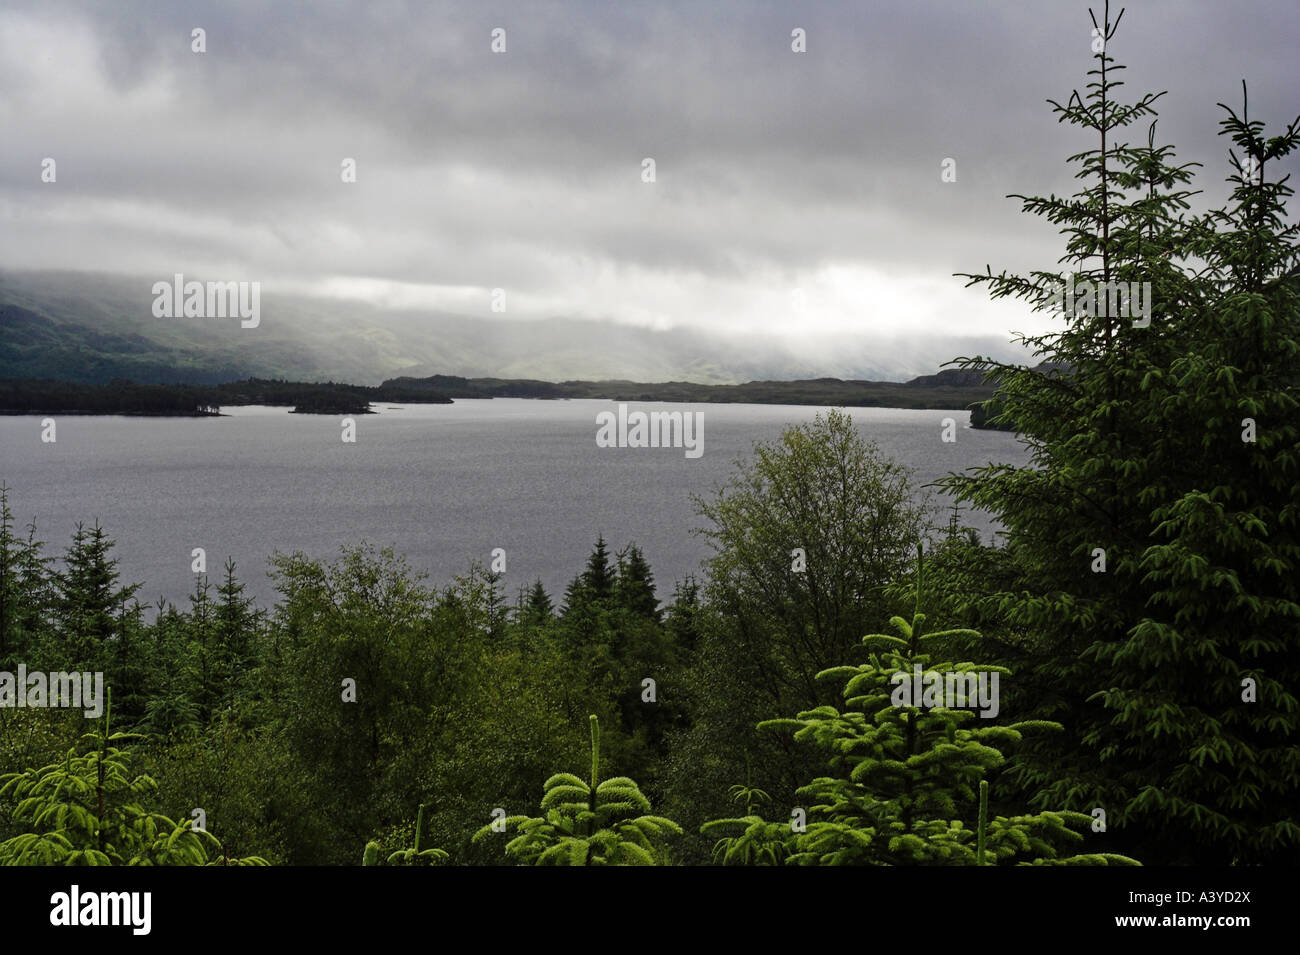 Loch Maree, West Scottish Highlands with pine trees in foreground and moody grey skies. Stock Photo